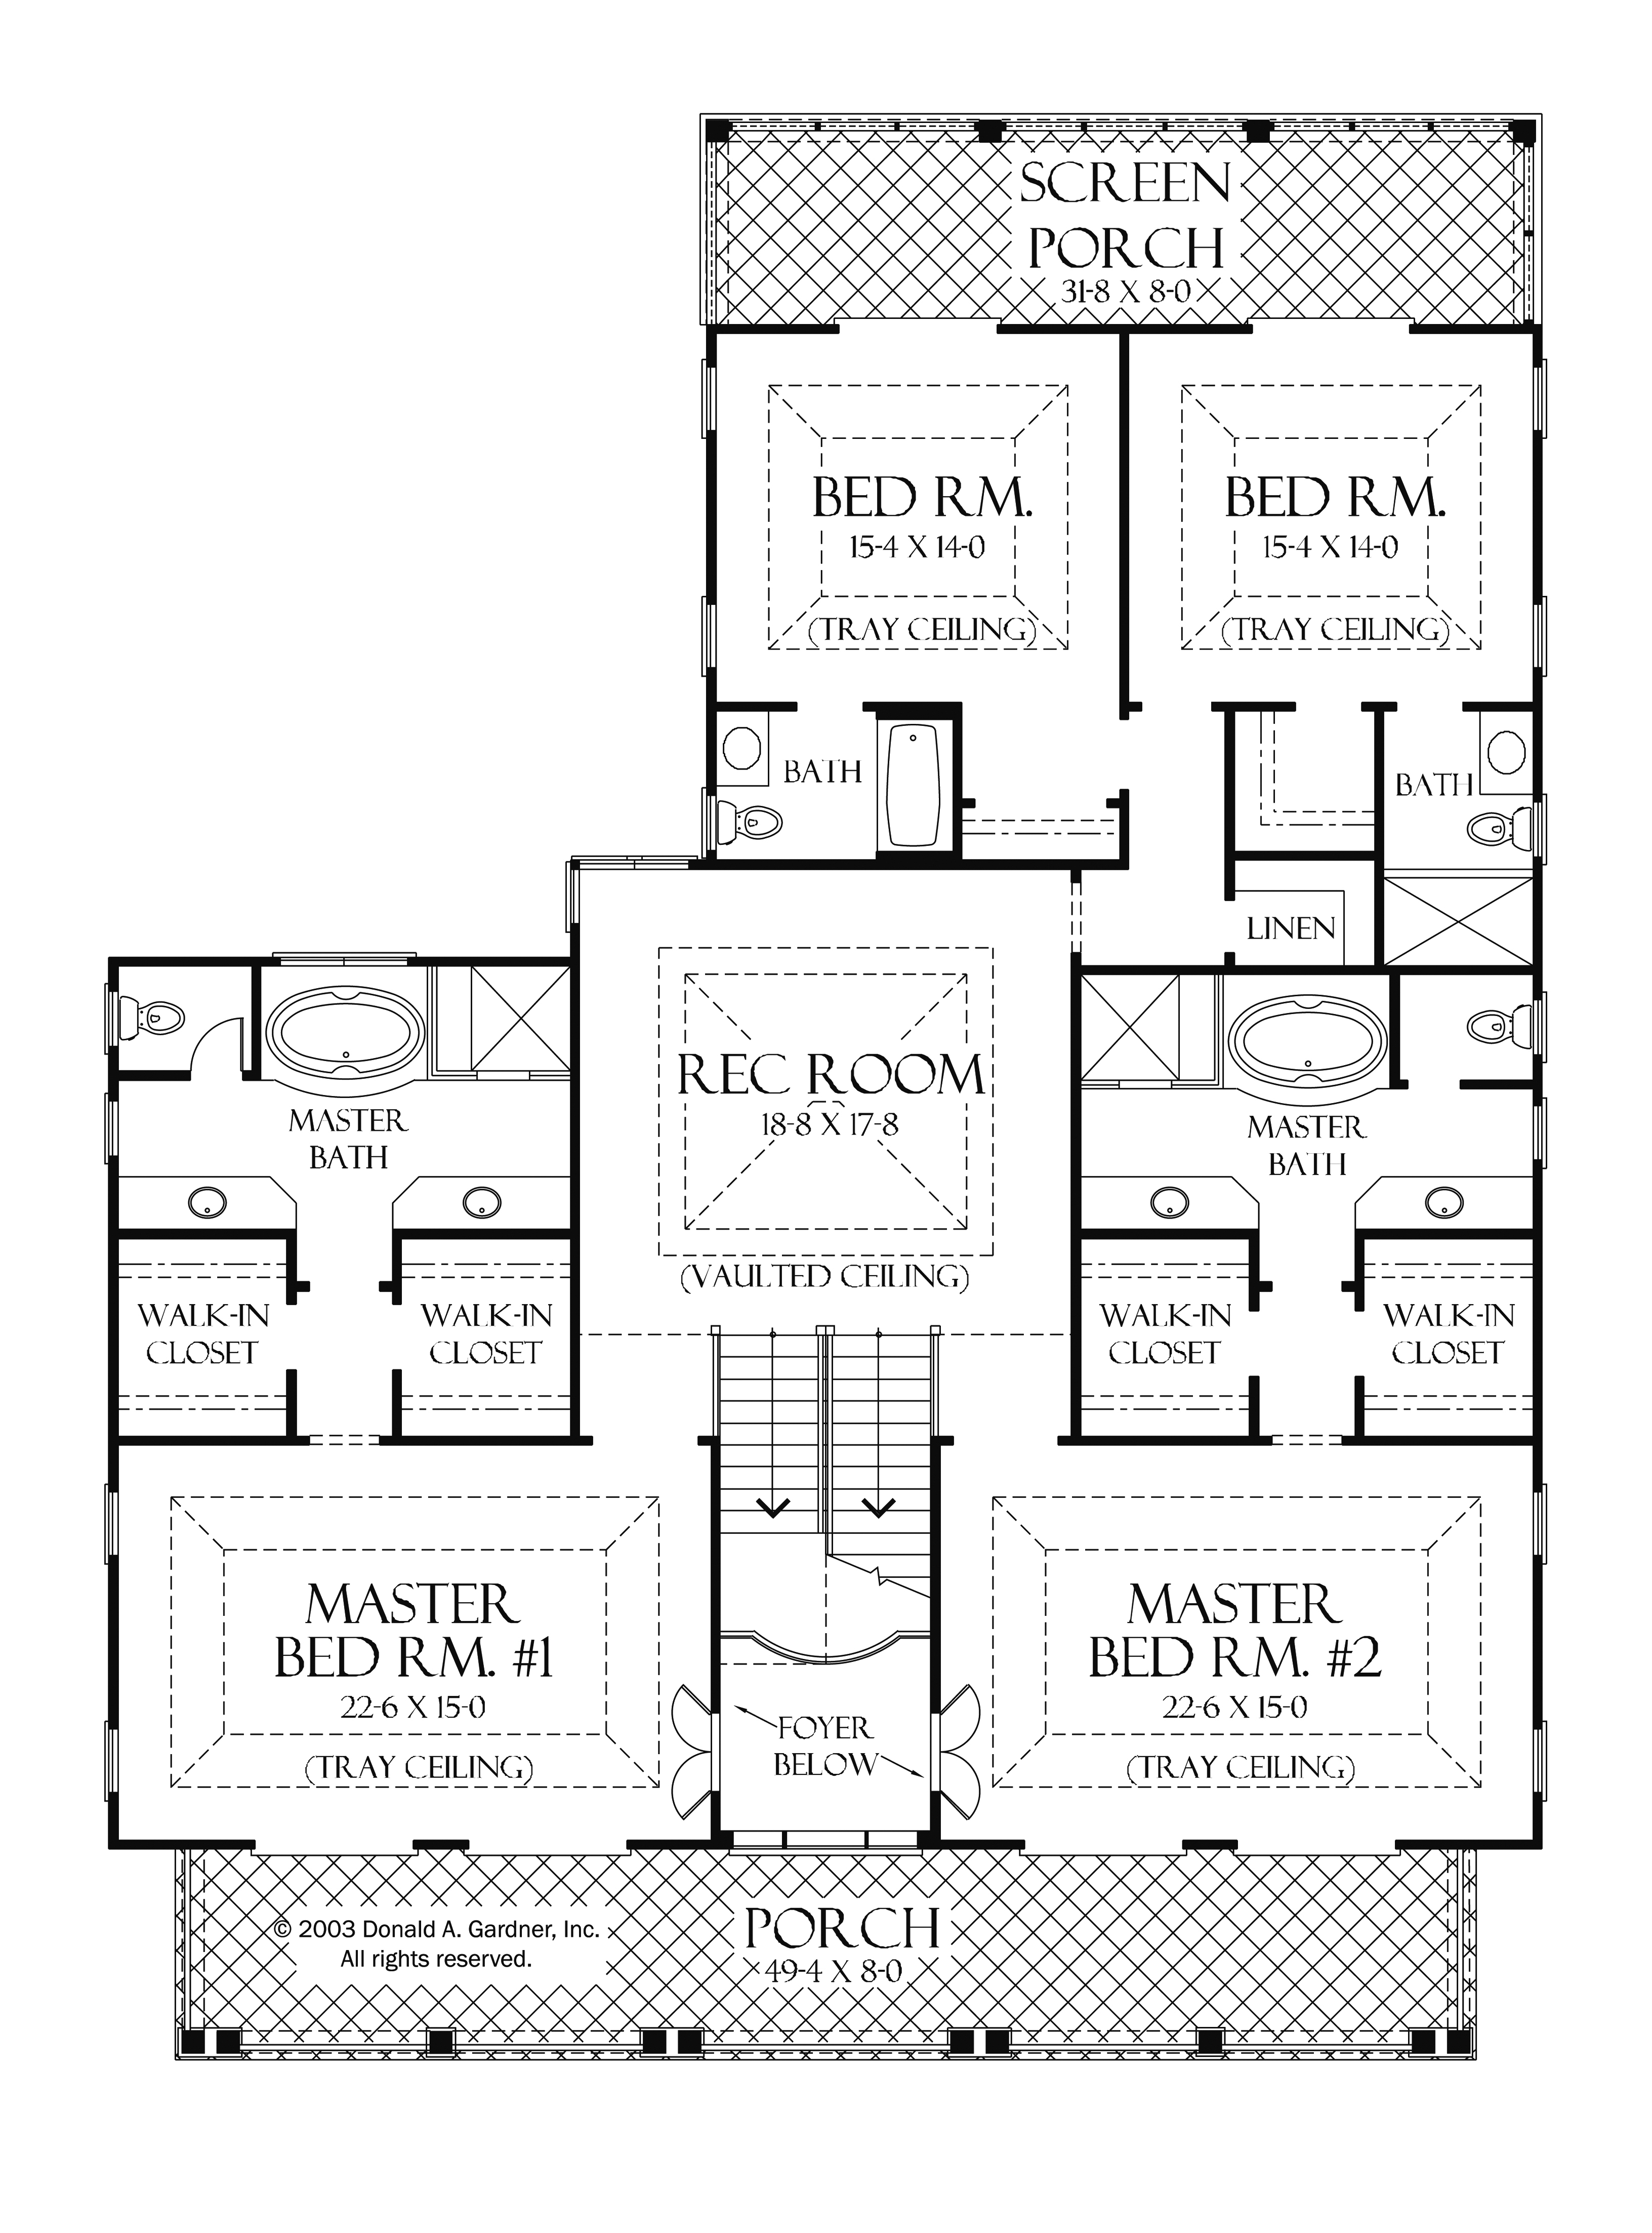 2 Master Bedroom Homes for Rent Near Me 2 Master Bedroom Floor Plans Best Of 27 Inspiring House Plans with 3